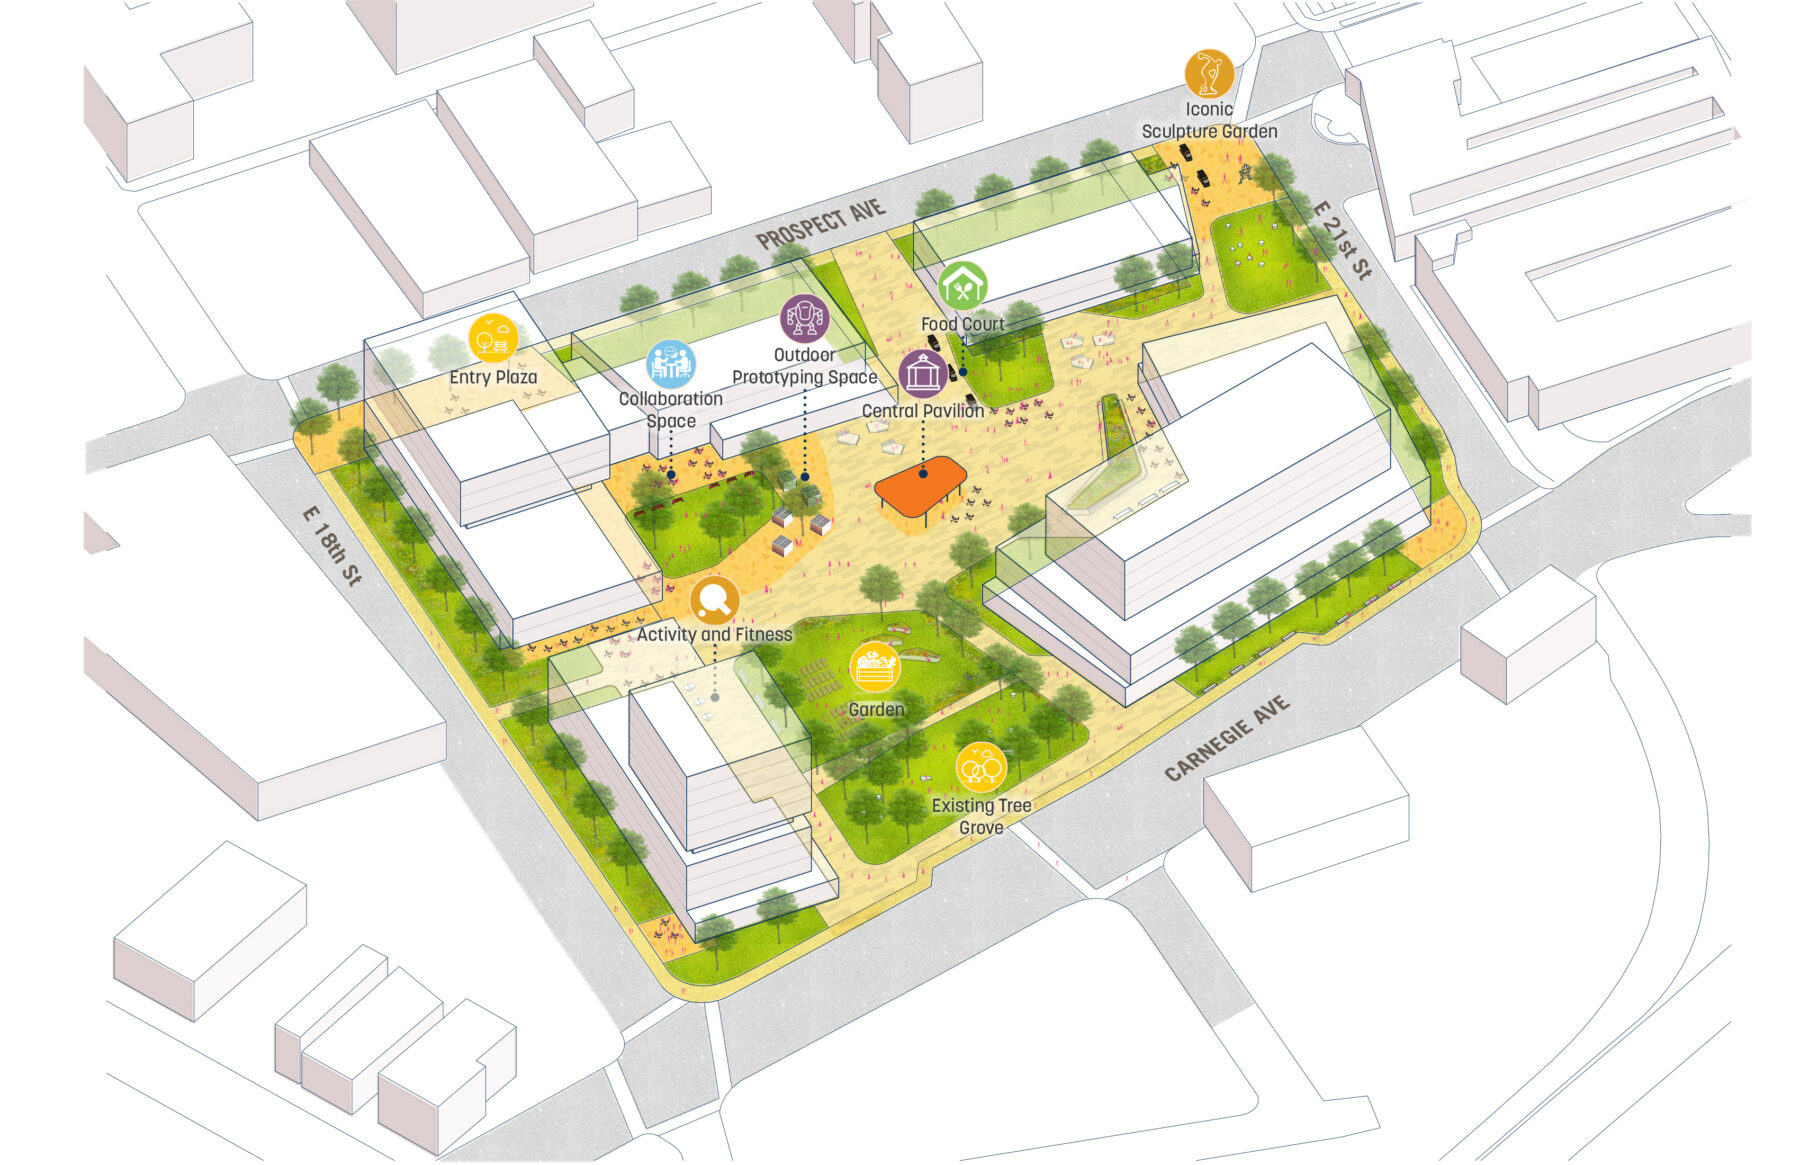 Diagram of the Partnership District with text callouts of venues including the Entry Plaza, collaboration space, activity and fitness, food court, etc